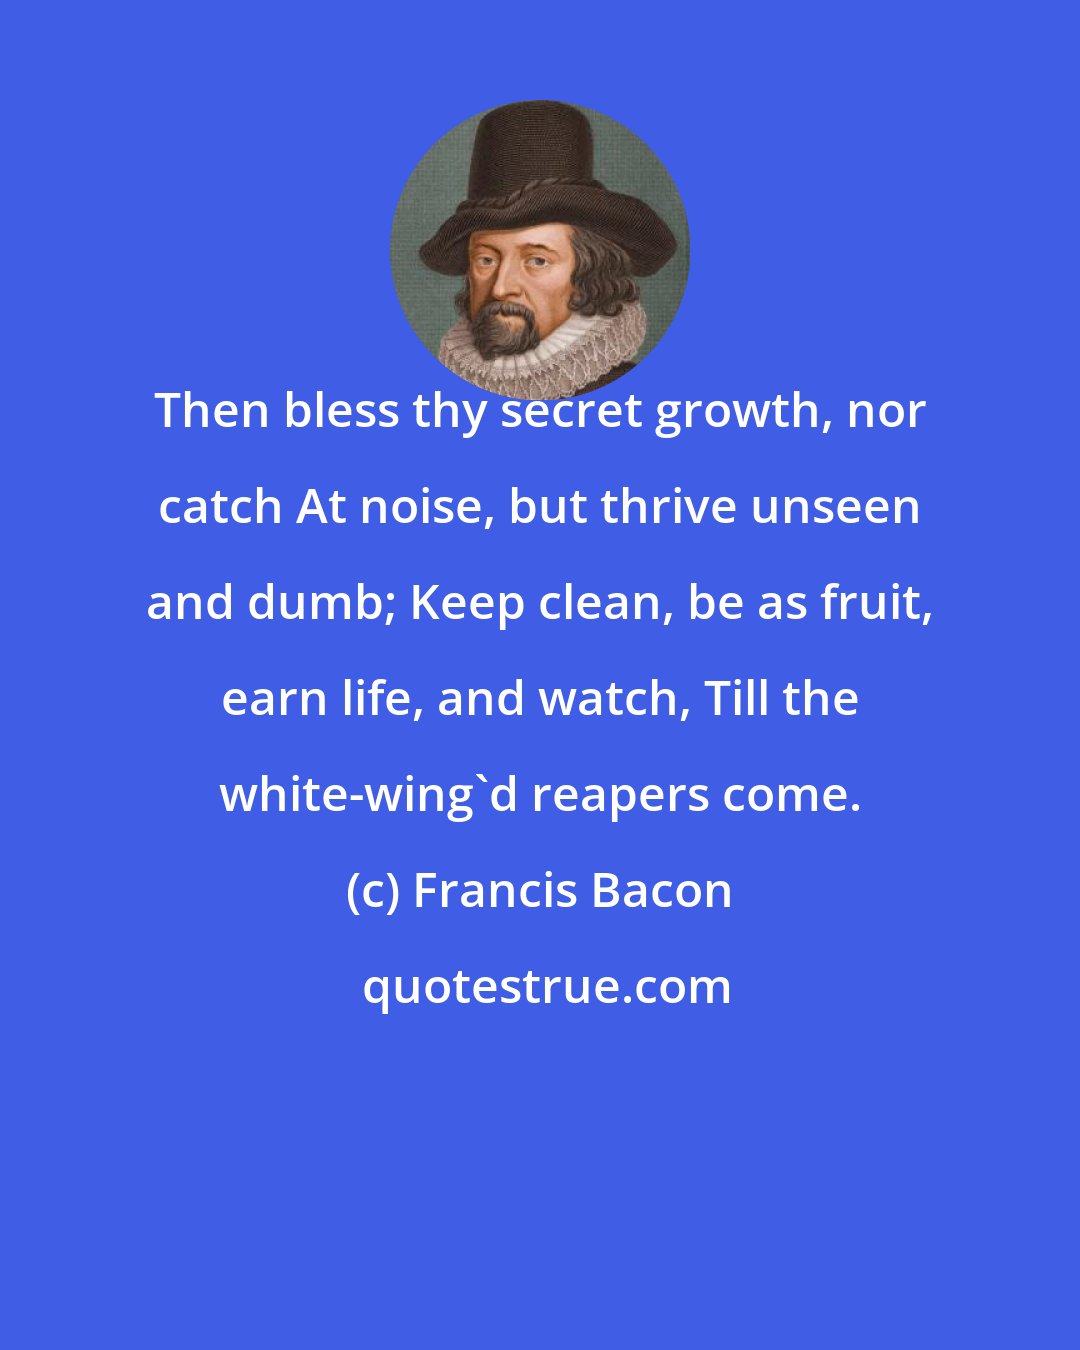 Francis Bacon: Then bless thy secret growth, nor catch At noise, but thrive unseen and dumb; Keep clean, be as fruit, earn life, and watch, Till the white-wing'd reapers come.